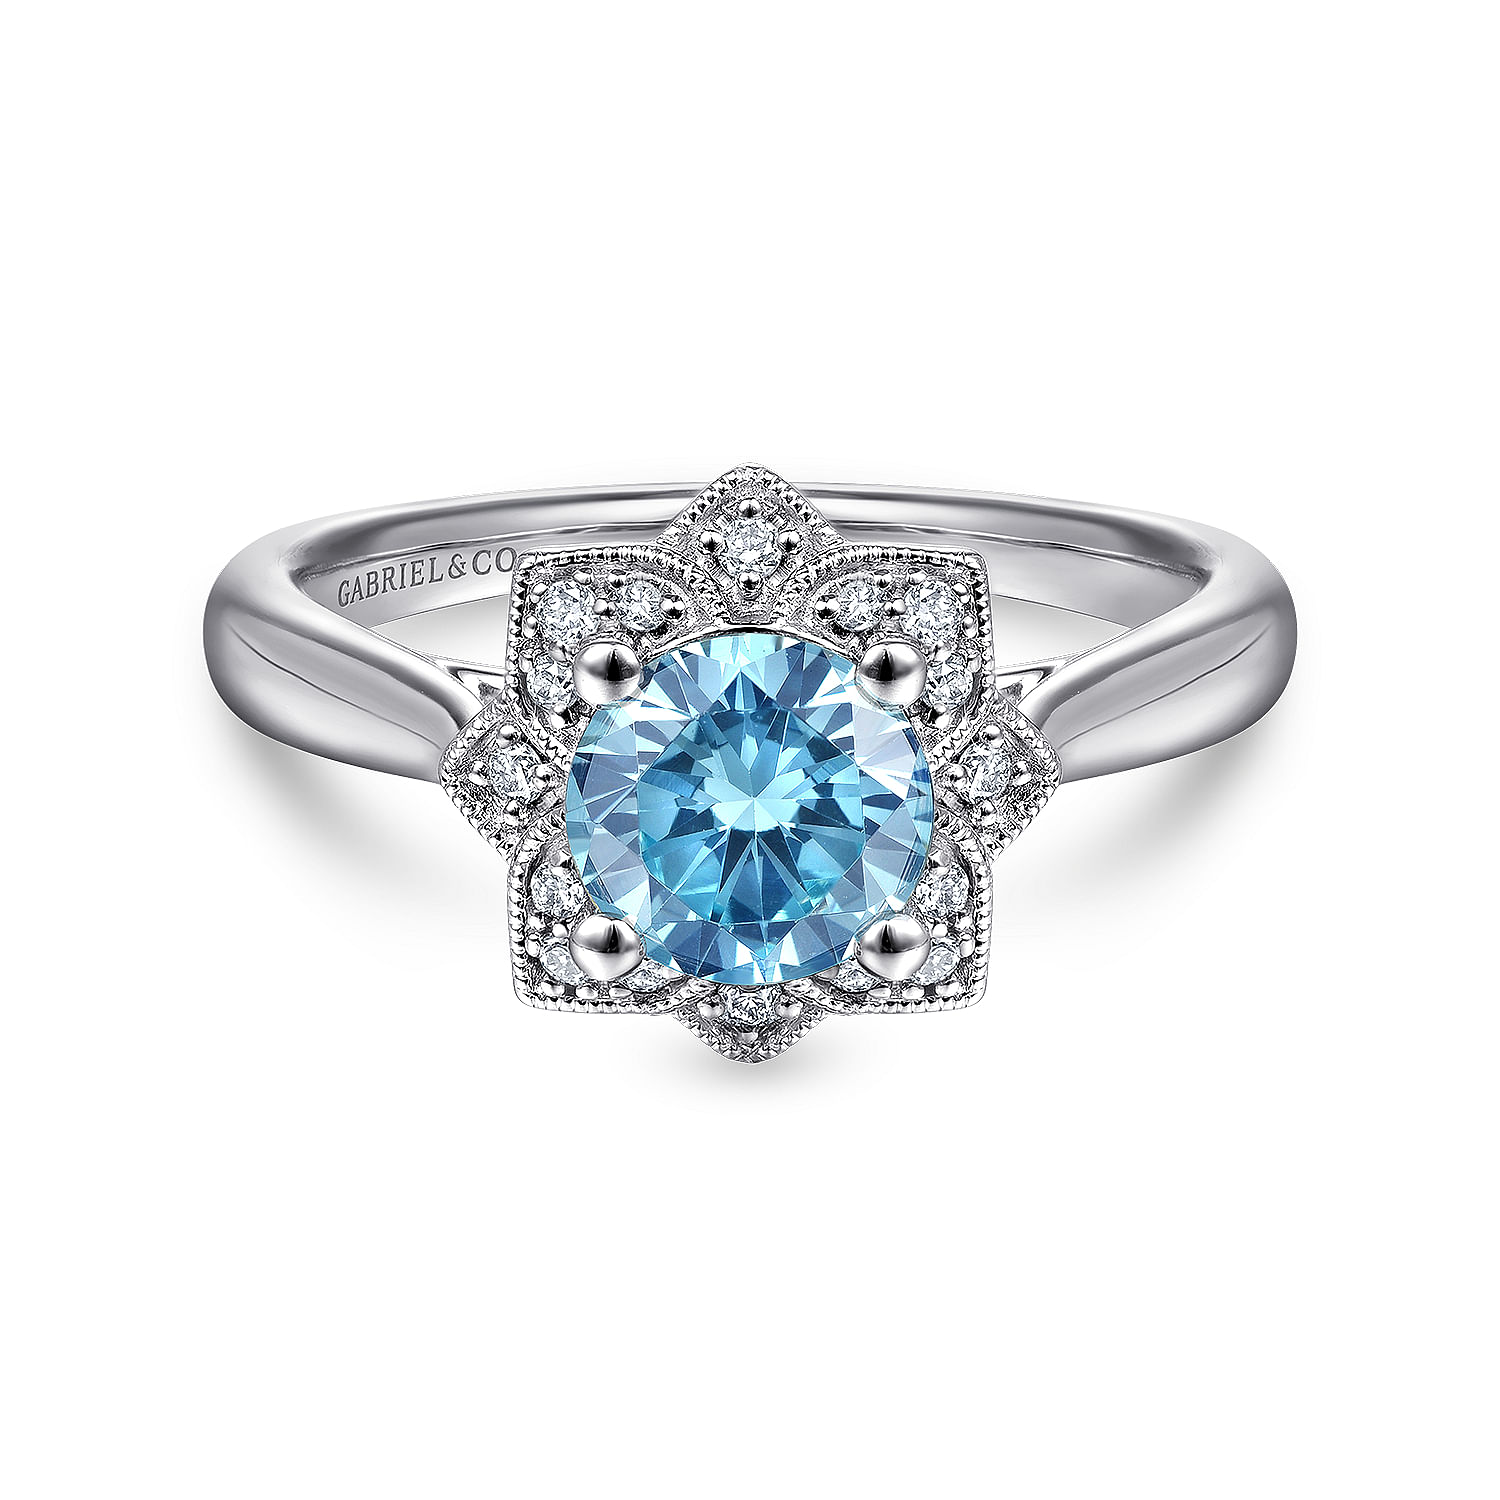 Vintage Inspired 14K White Gold Round Blue Topaz and Floral Diamond Halo Ring